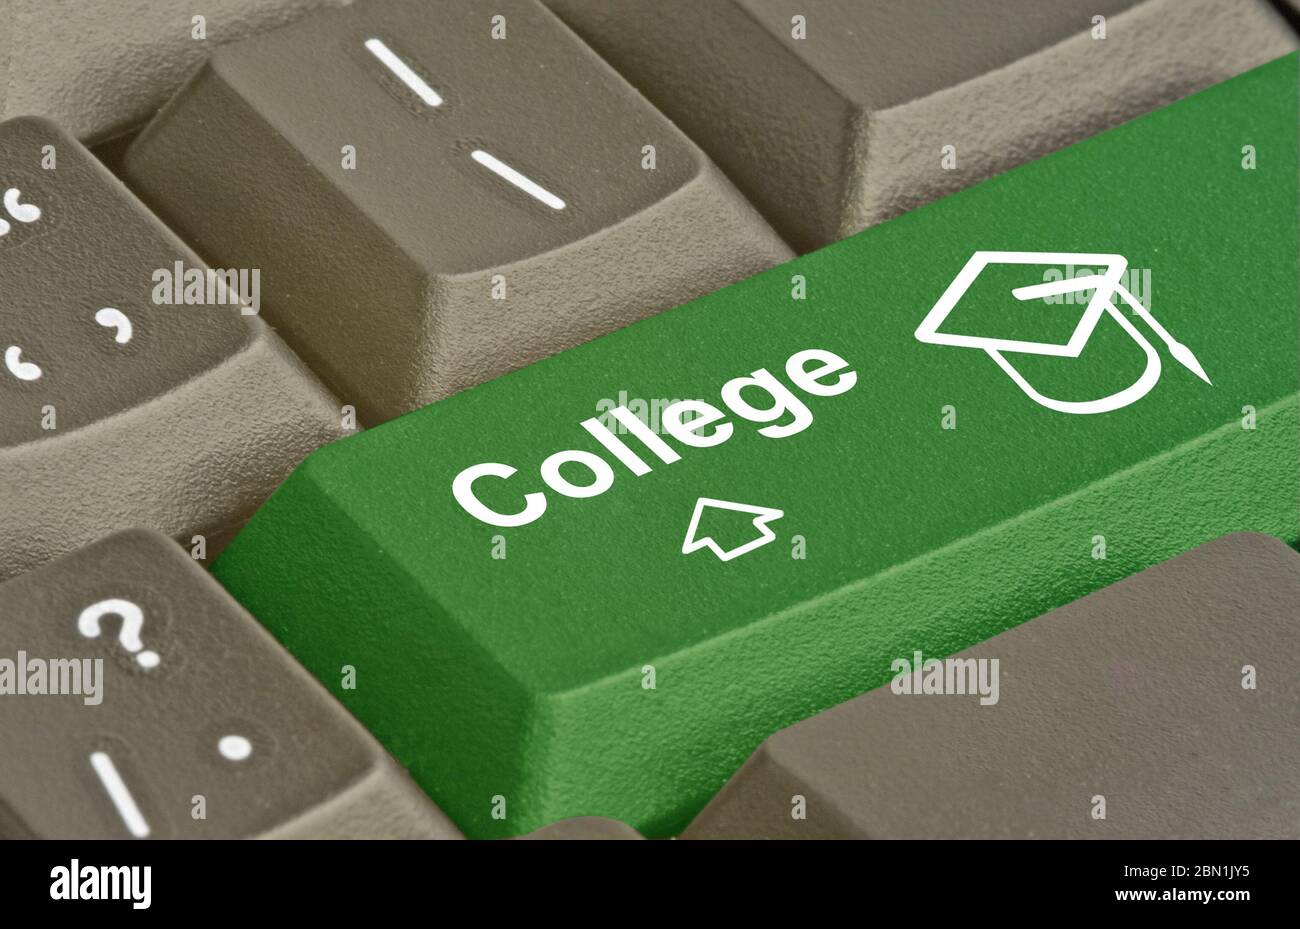 Green key for college admission Stock Photo